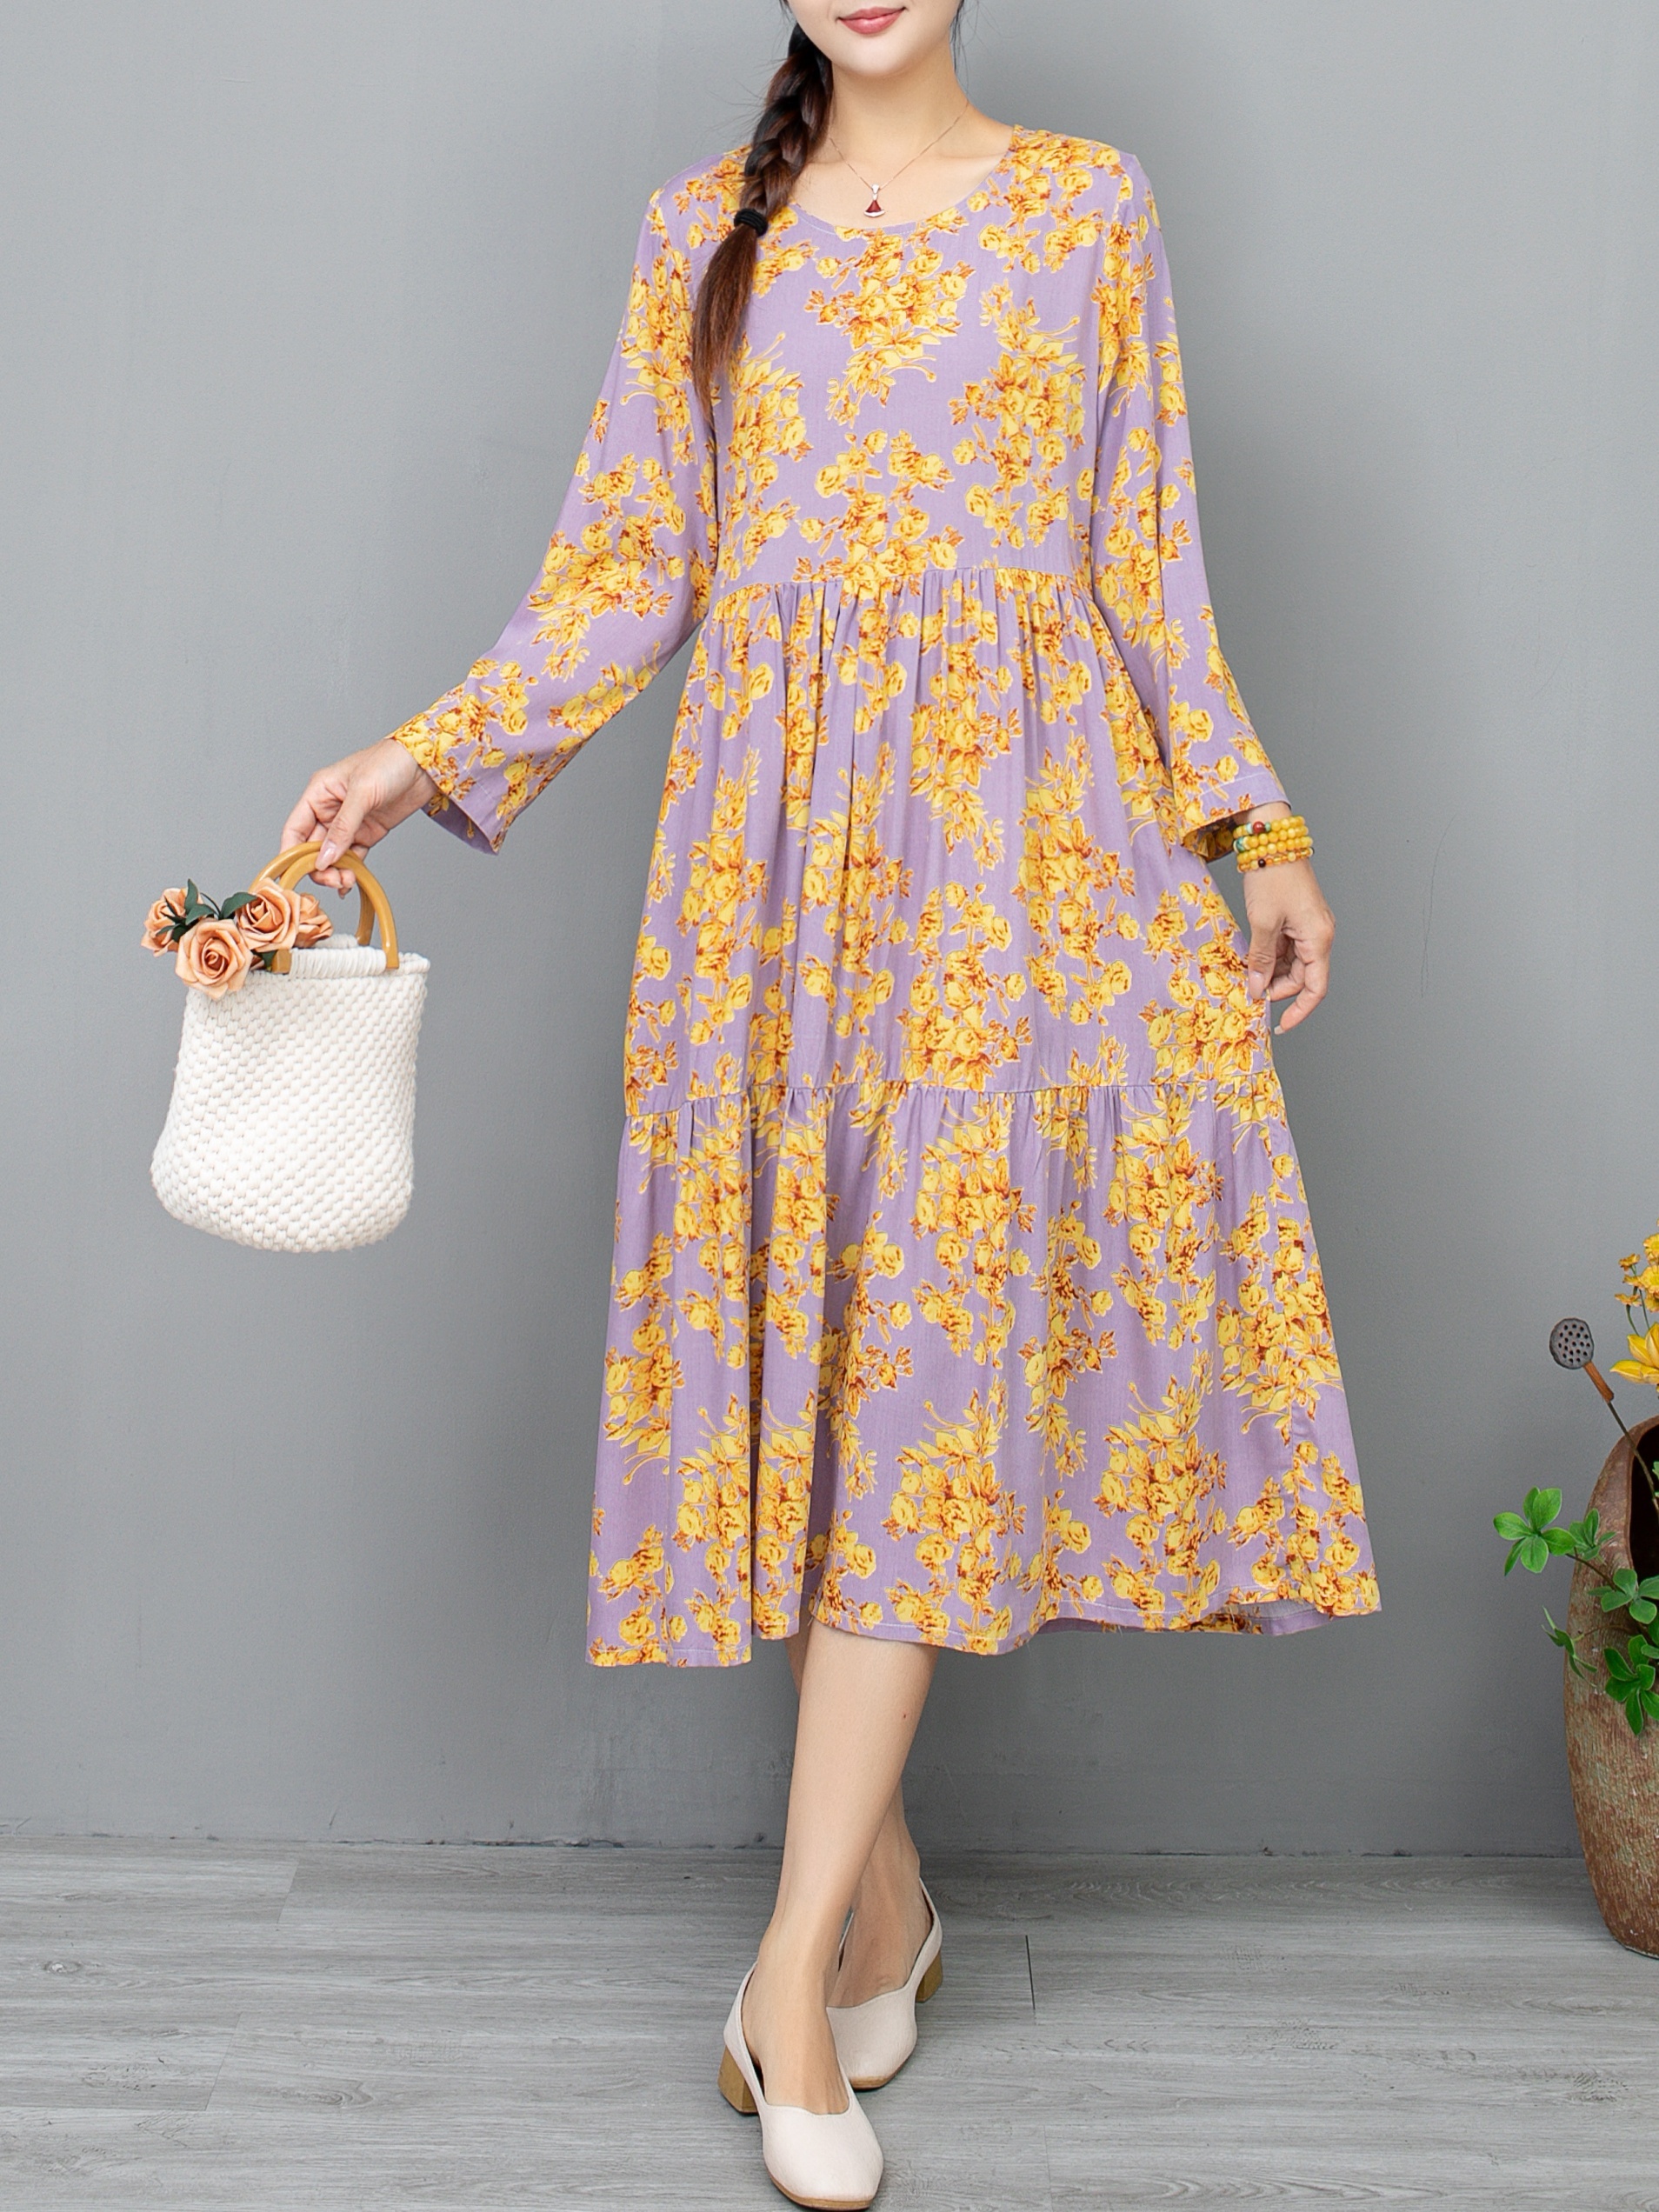 floral print crew neck dress elegant long sleeve a line dress for spring fall womens clothing